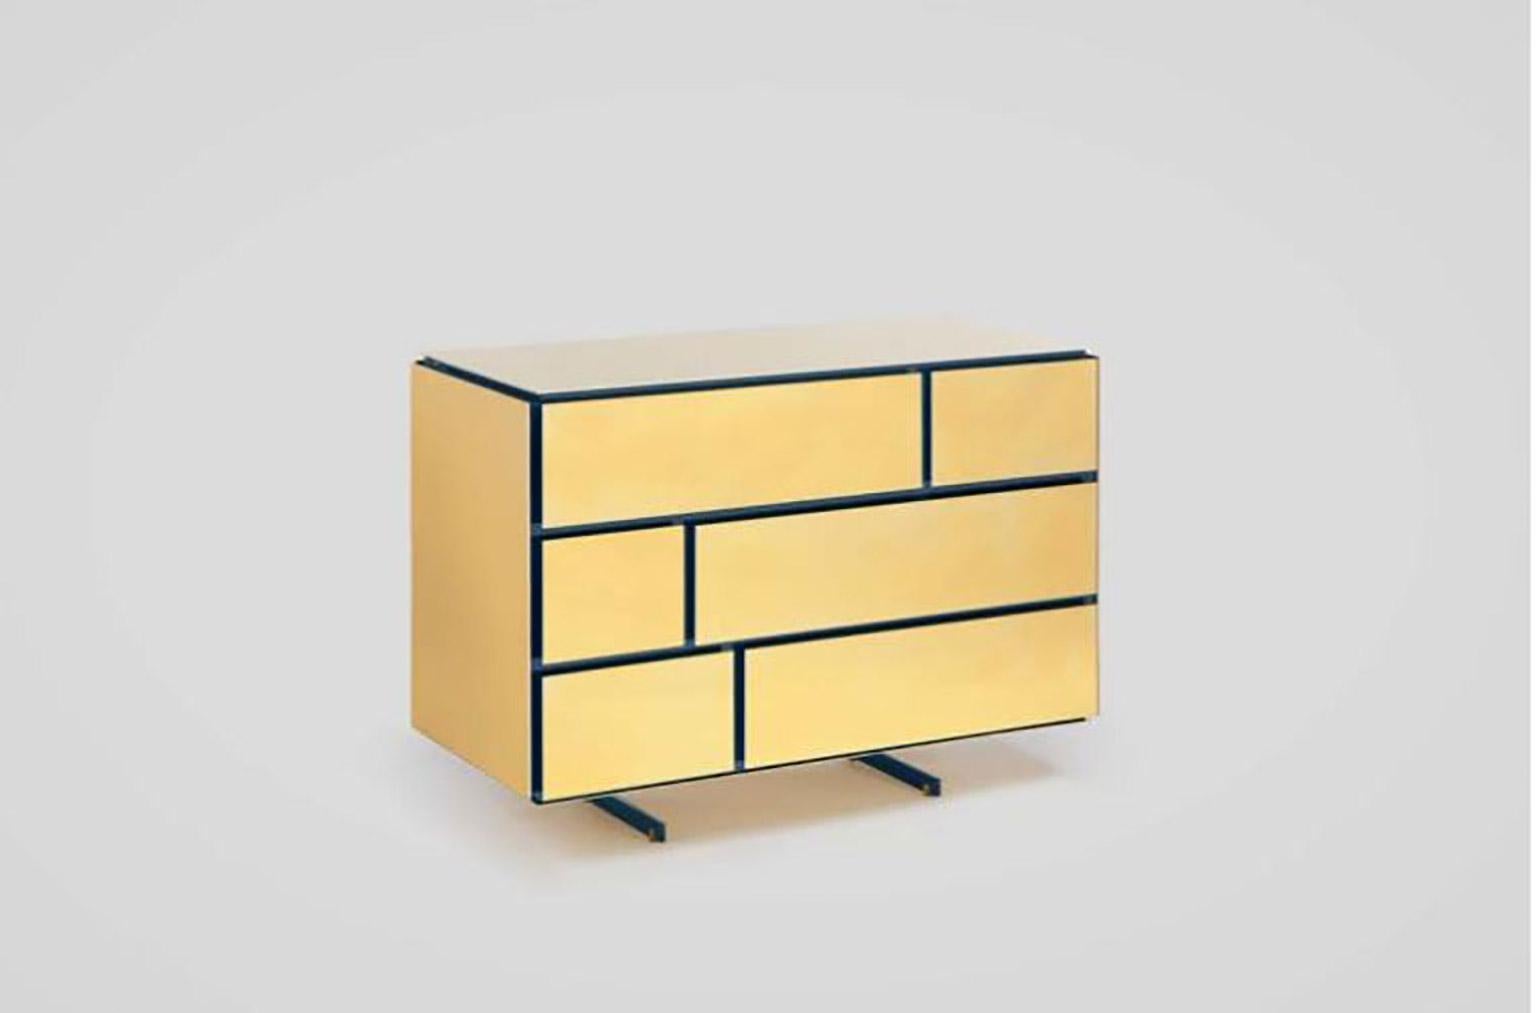 SEM Gold collection, chest of six drawers. Verdemare lacquered wooden structure, gloss finish. Lining of drawers in ochre mohair velvet. Available more colorway variants. External shell in 24-karat polished yellow gold-plated combined with